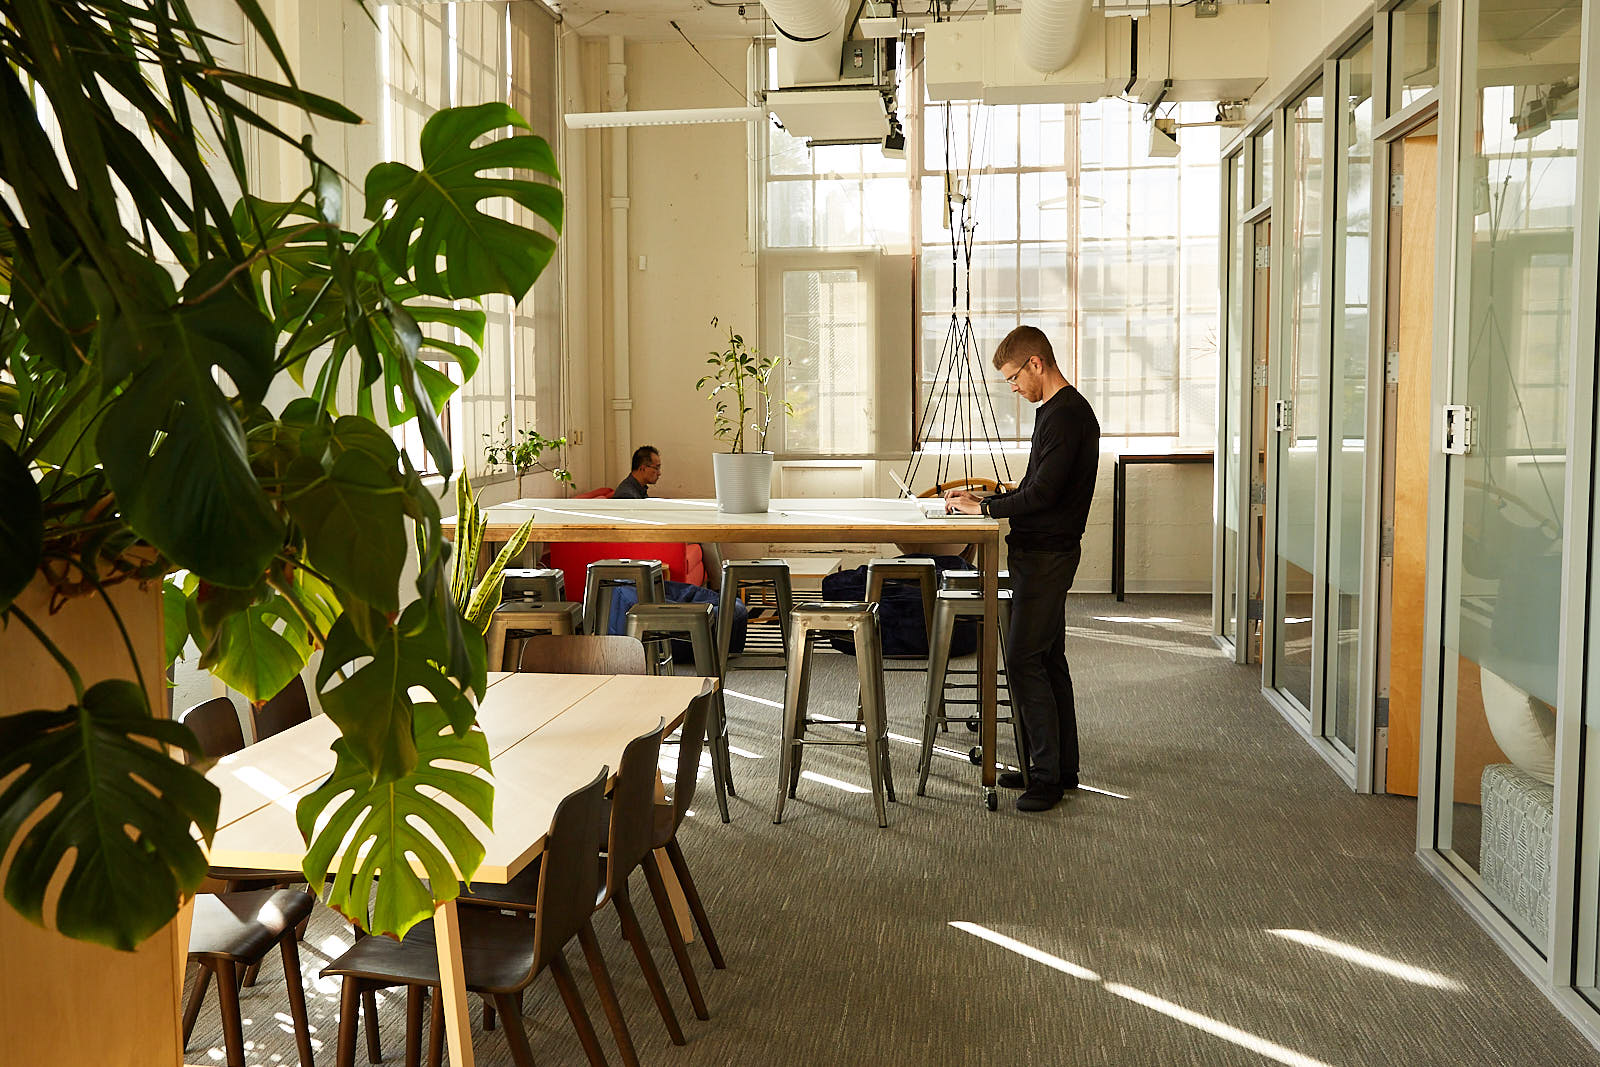 WeaveGrid's coworking space with rectangular tables and two people working on laptops